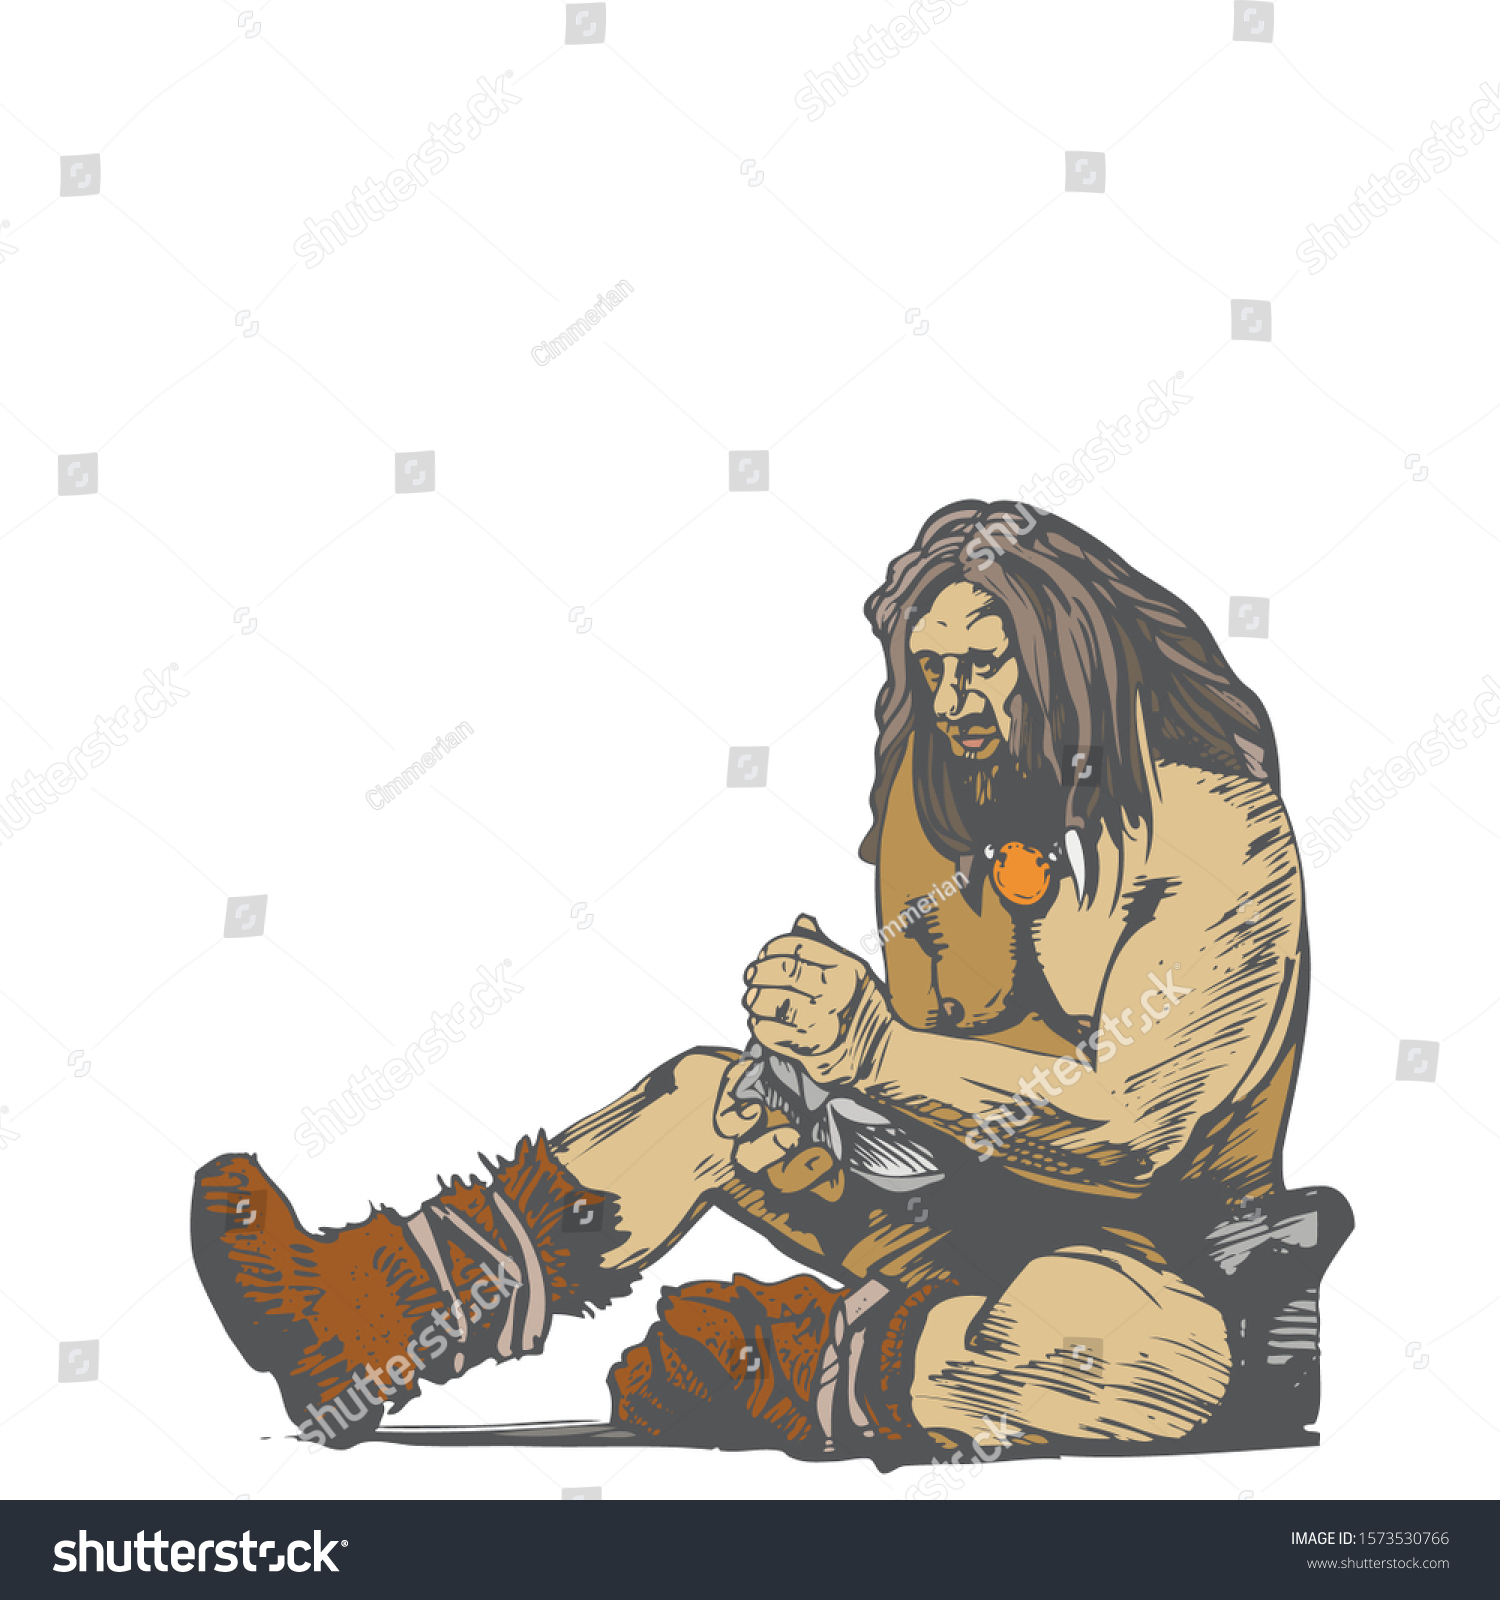 SVG of Cro-Magnon, ancient man makes fire. Sitting man isolated on white background. Vector illustration svg